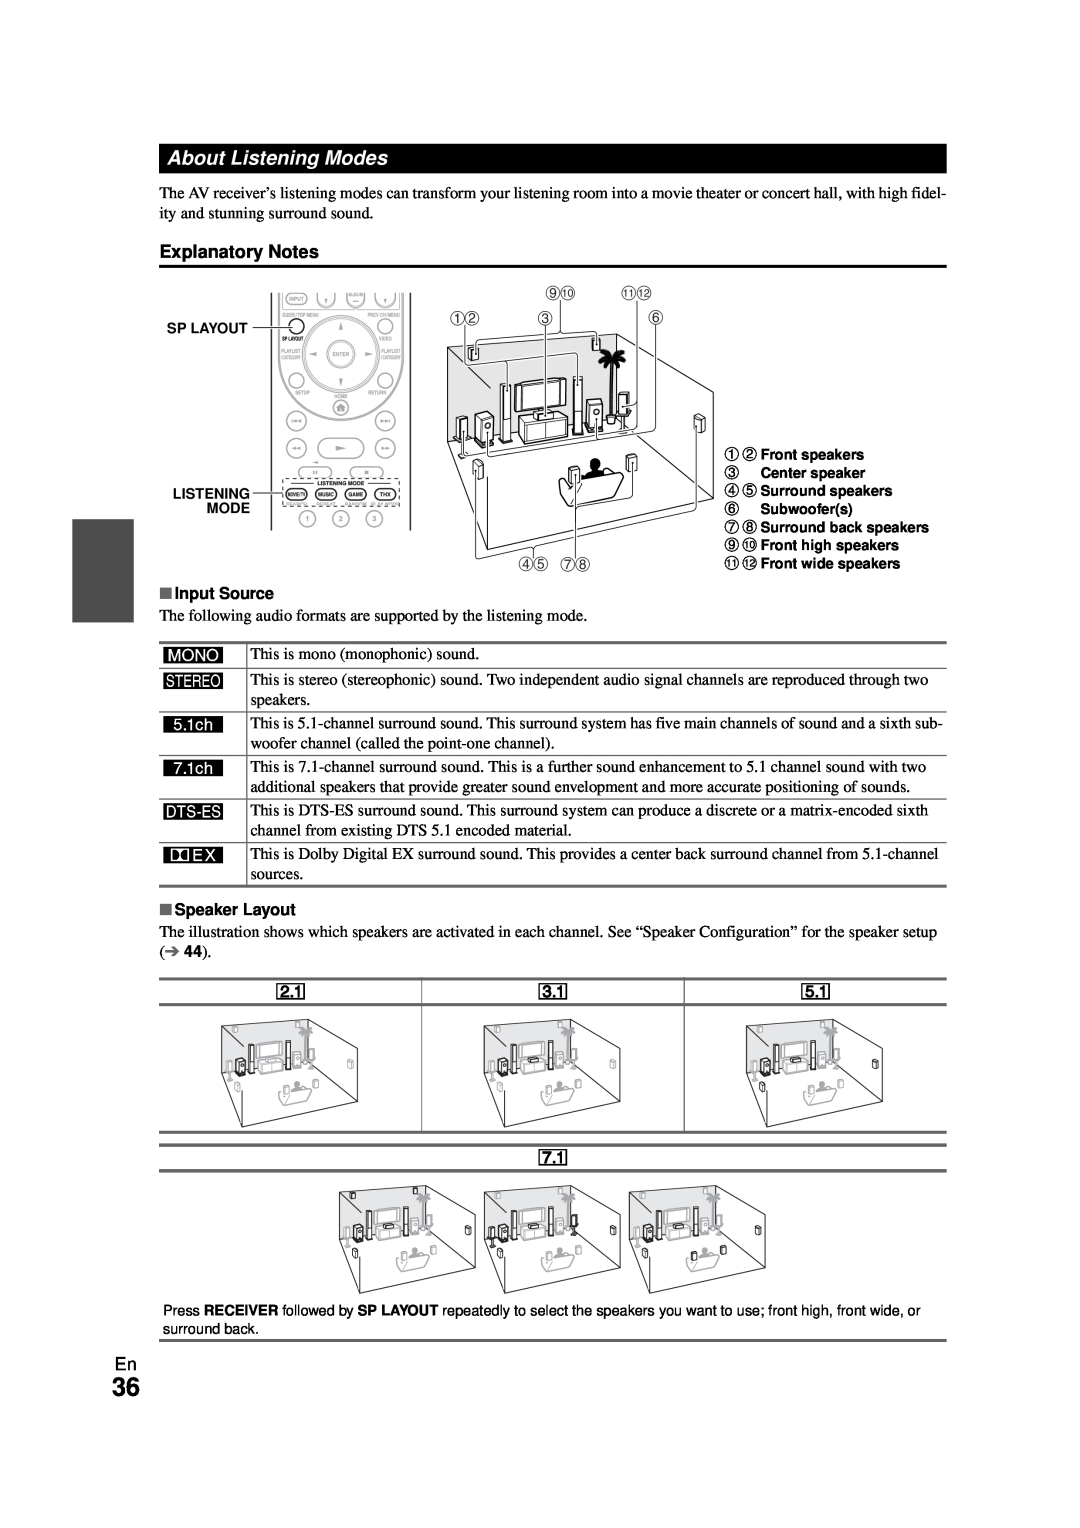 Onkyo HT-RC270 instruction manual About Listening Modes, Explanatory Notes, Input Source, Speaker Layout 